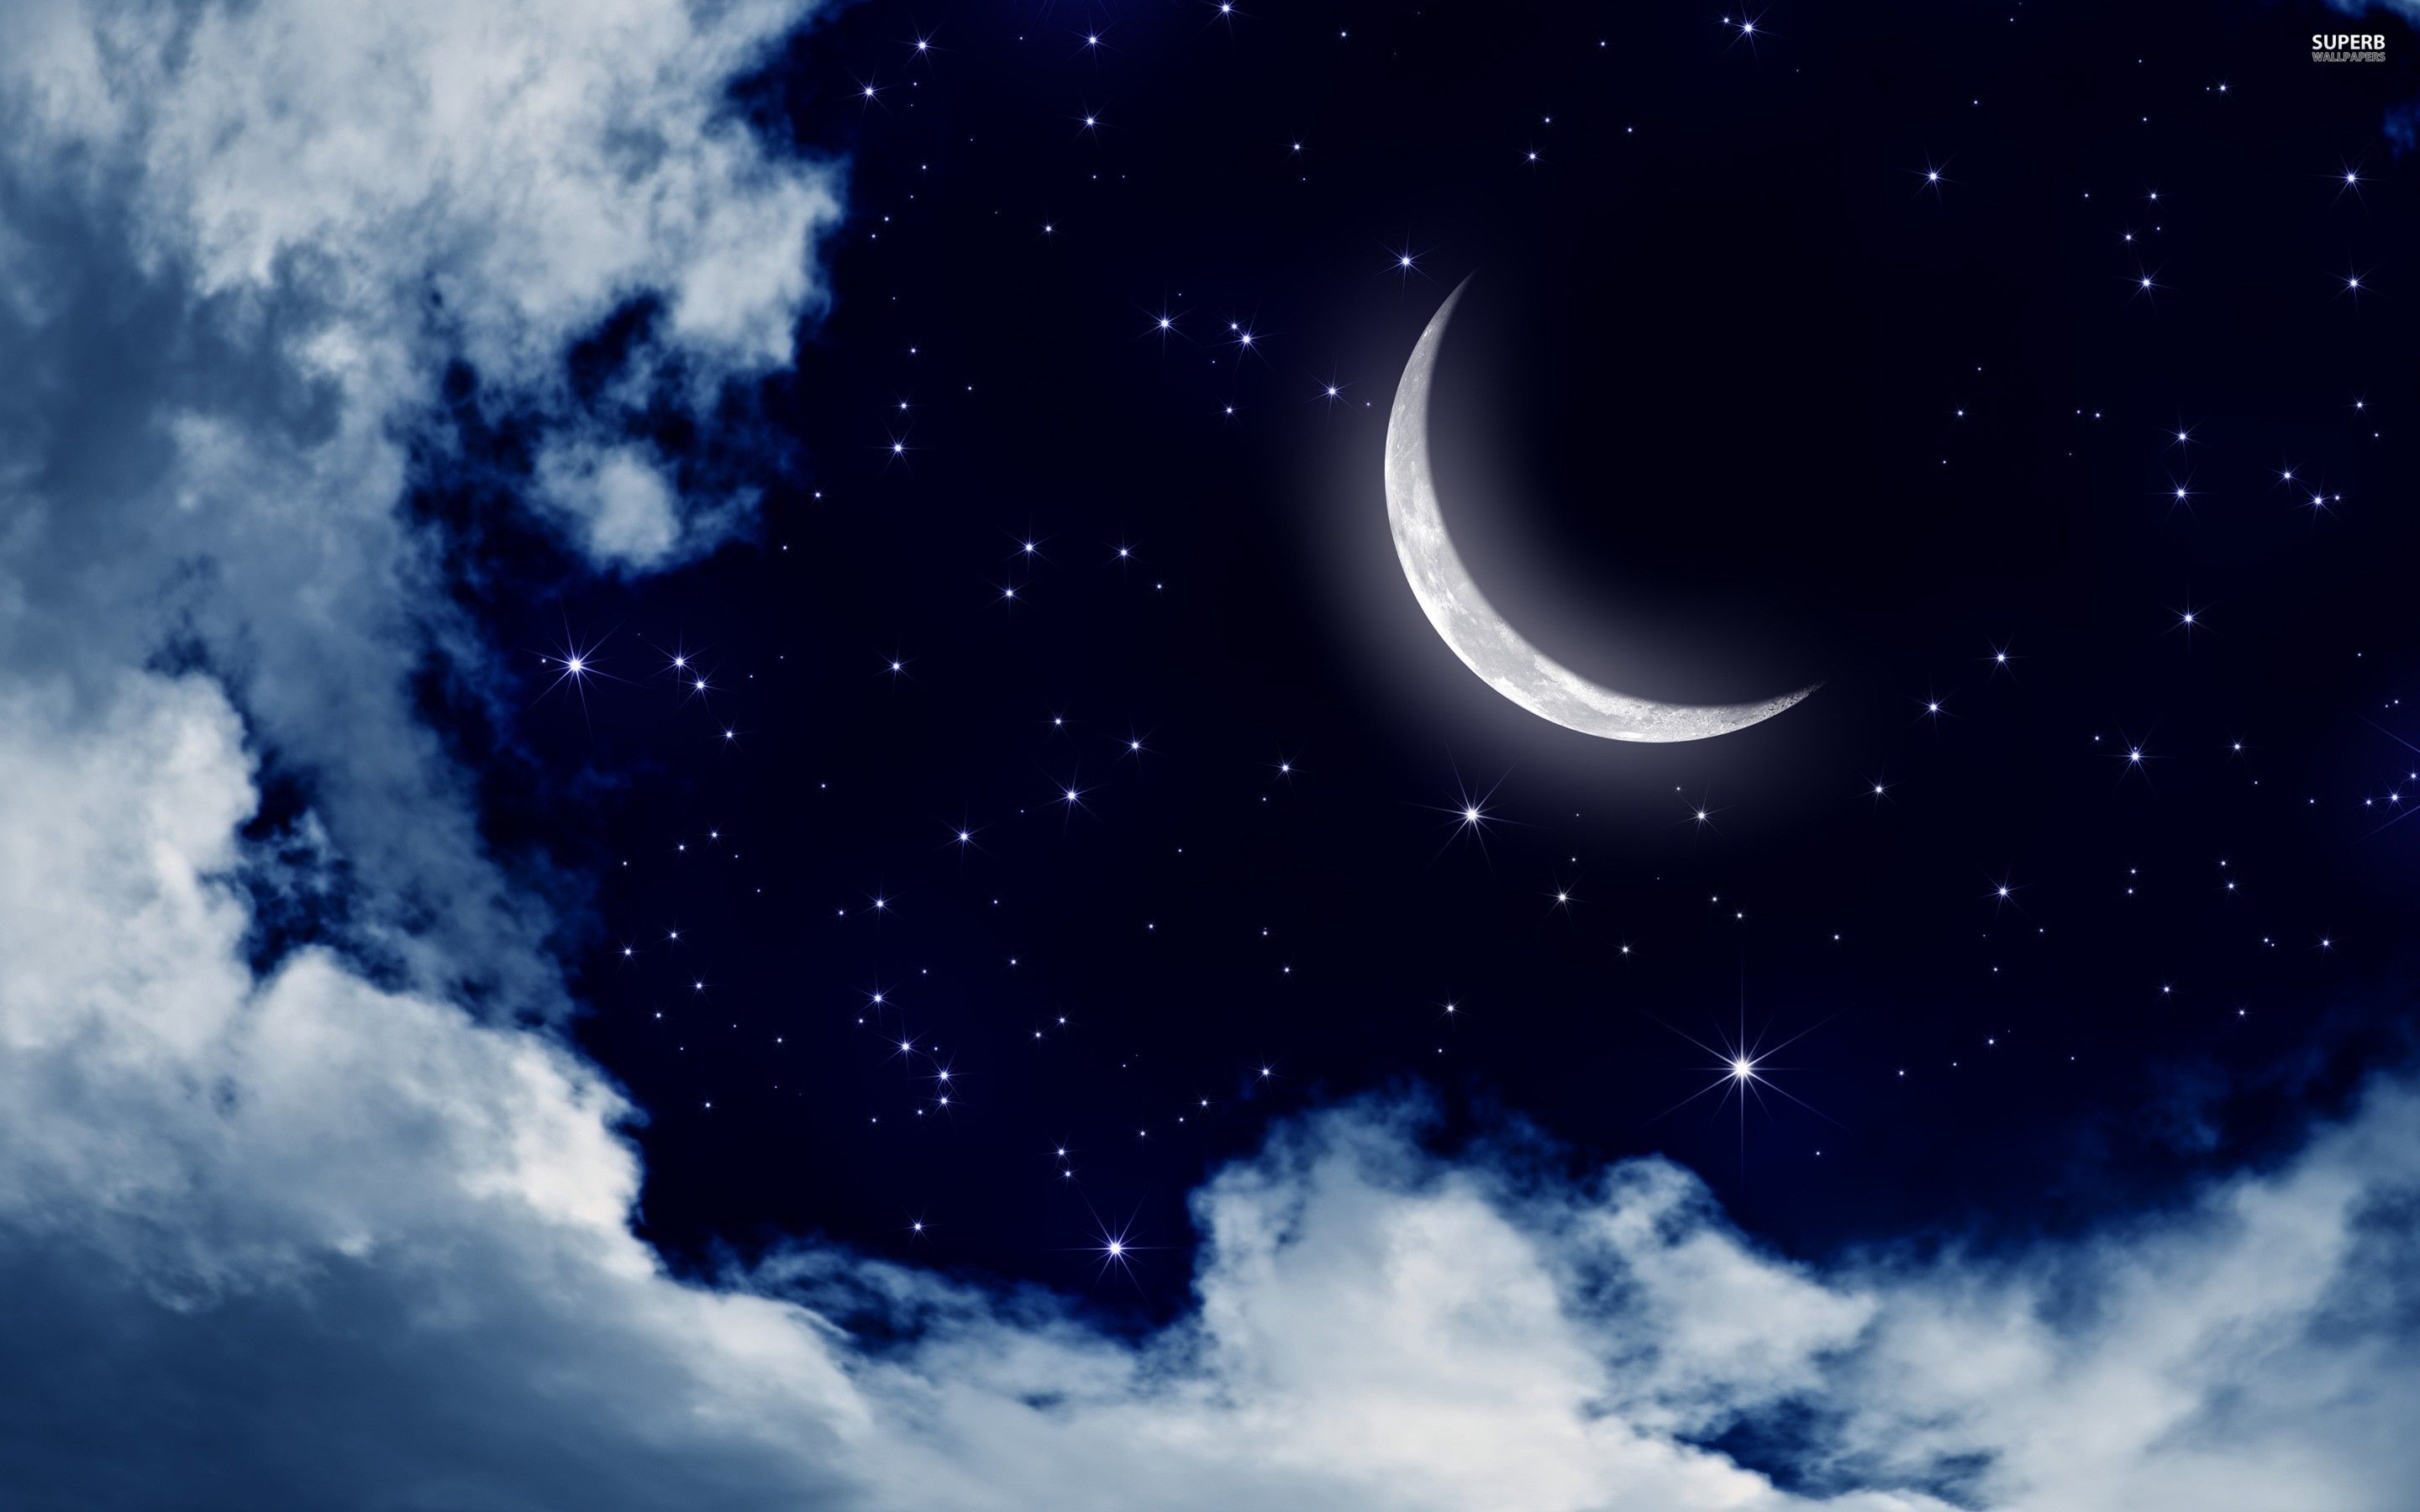 Moon and stars in the sky wallpaper - Digital Art wallpapers -